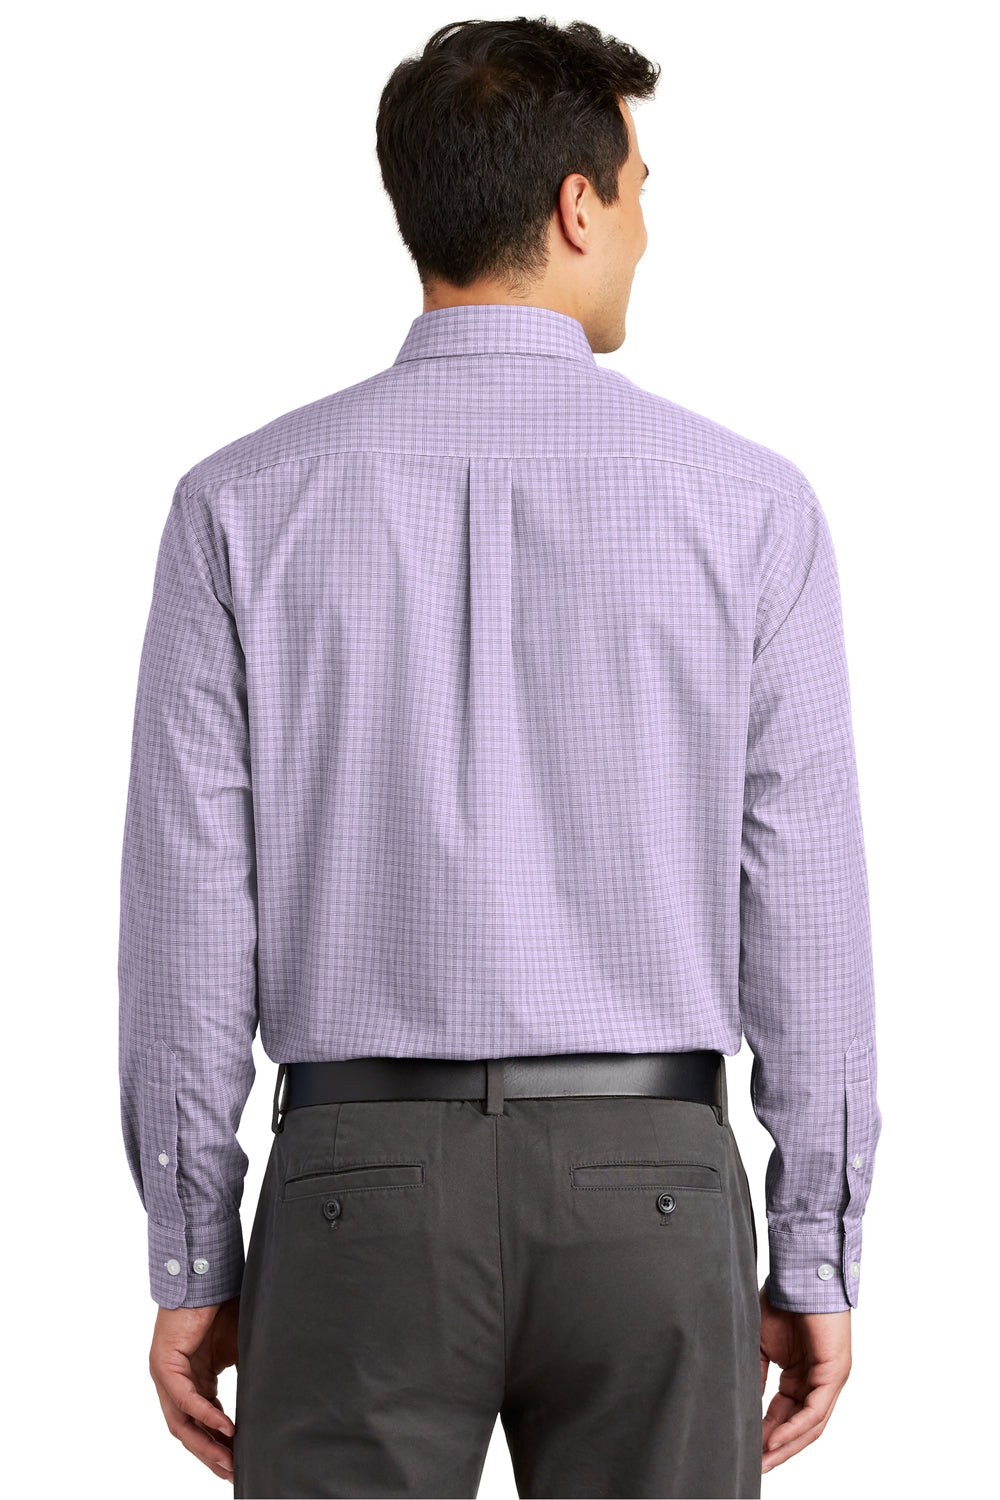 Port Authority S639 Mens Easy Care Wrinkle Resistant Long Sleeve Button Down Shirt w/ Pocket Purple Back